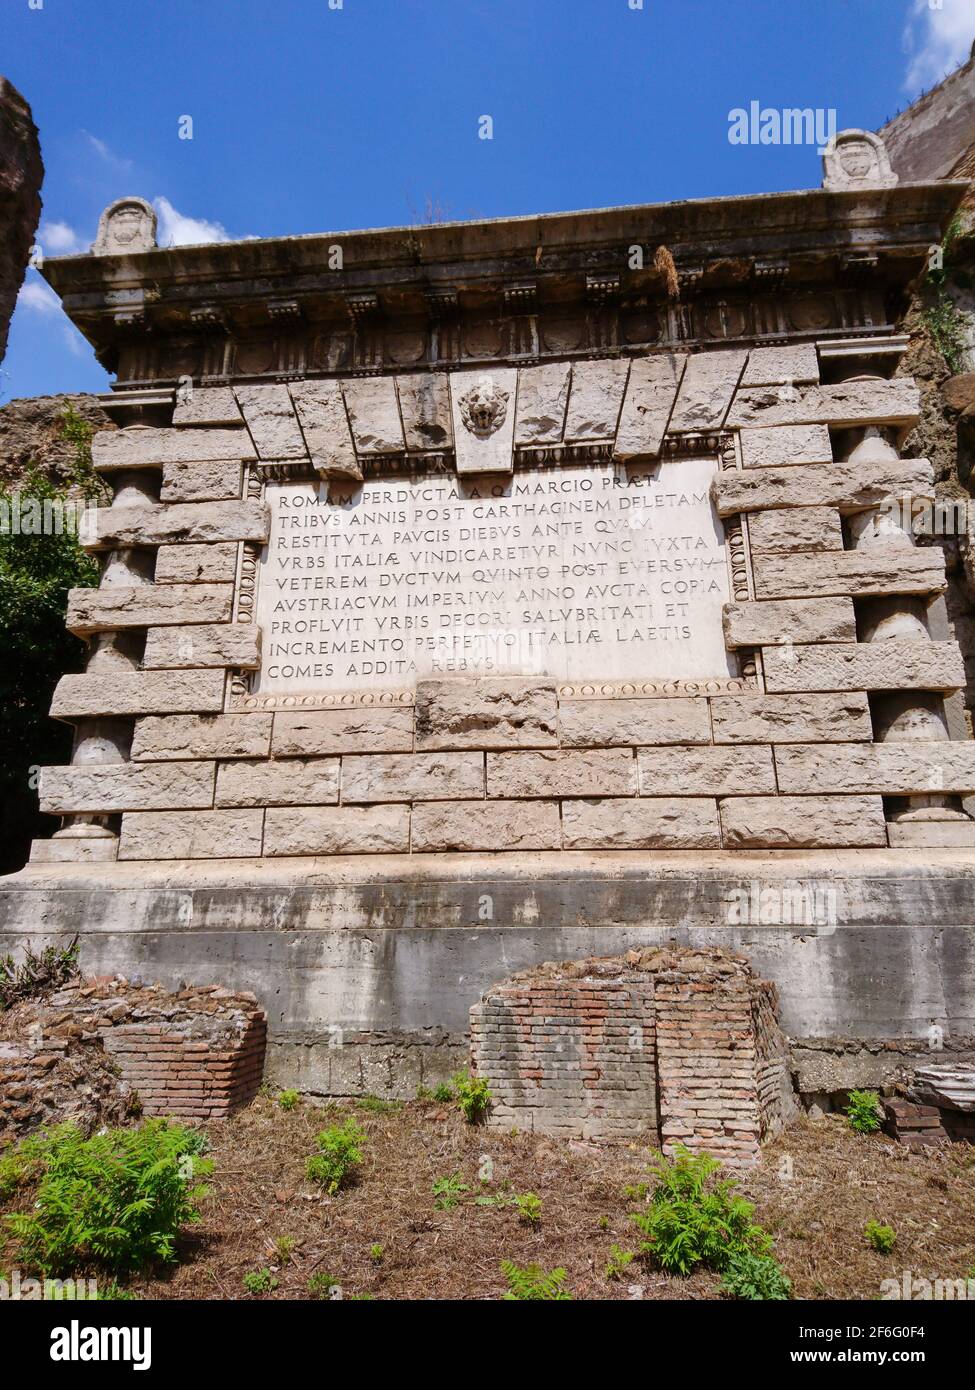 Latin inscription of Larger Gate or Porta Maggiore. Ancient 3rd-century Rome's city wall gate with two aqueducts. Rome city center historical sights, Stock Photo